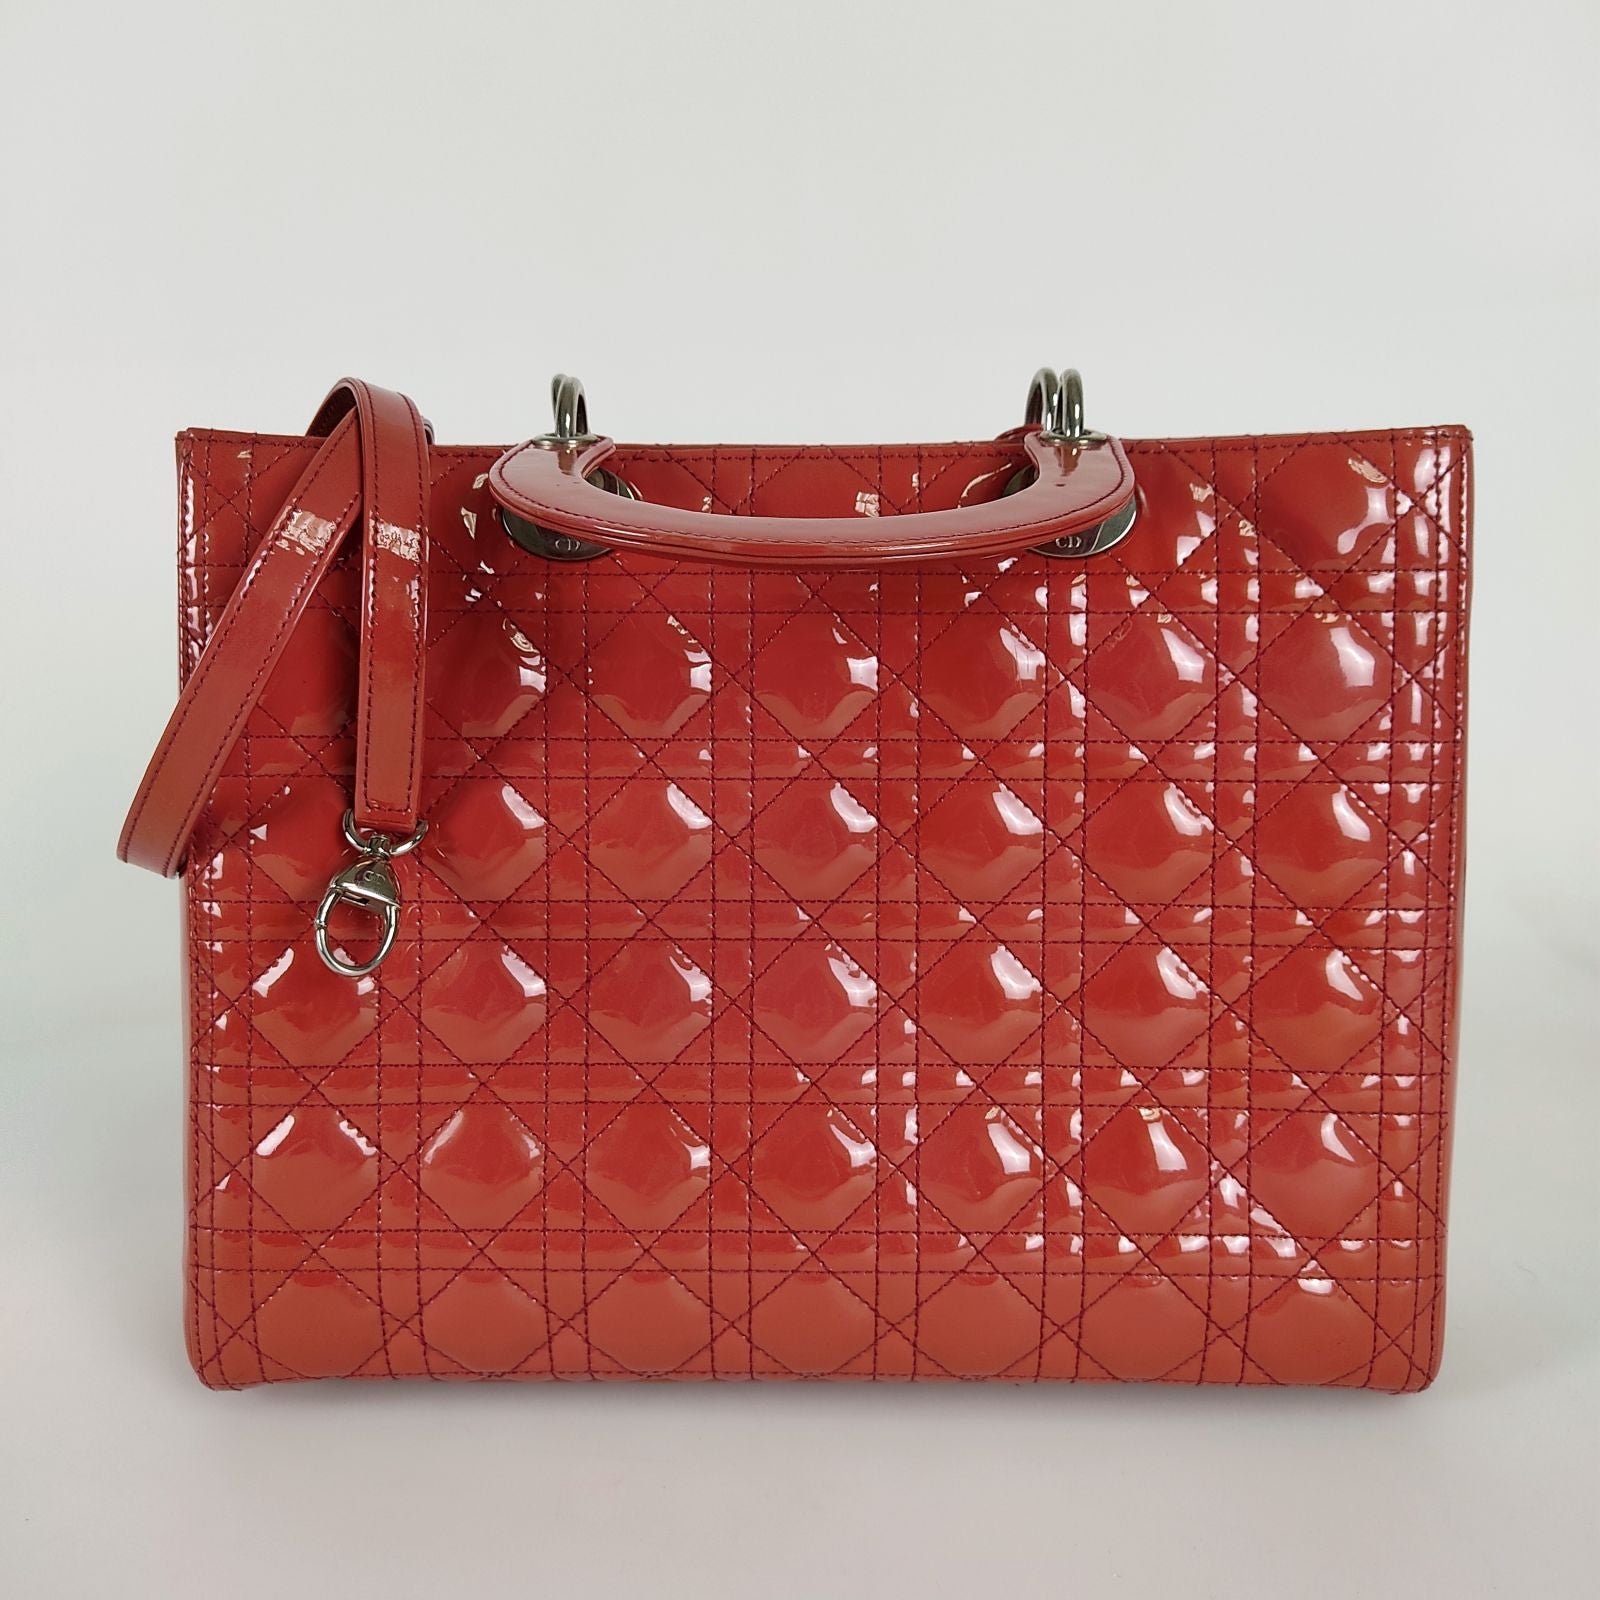 DIOR Christian Lady shoulder bag in red patent leather